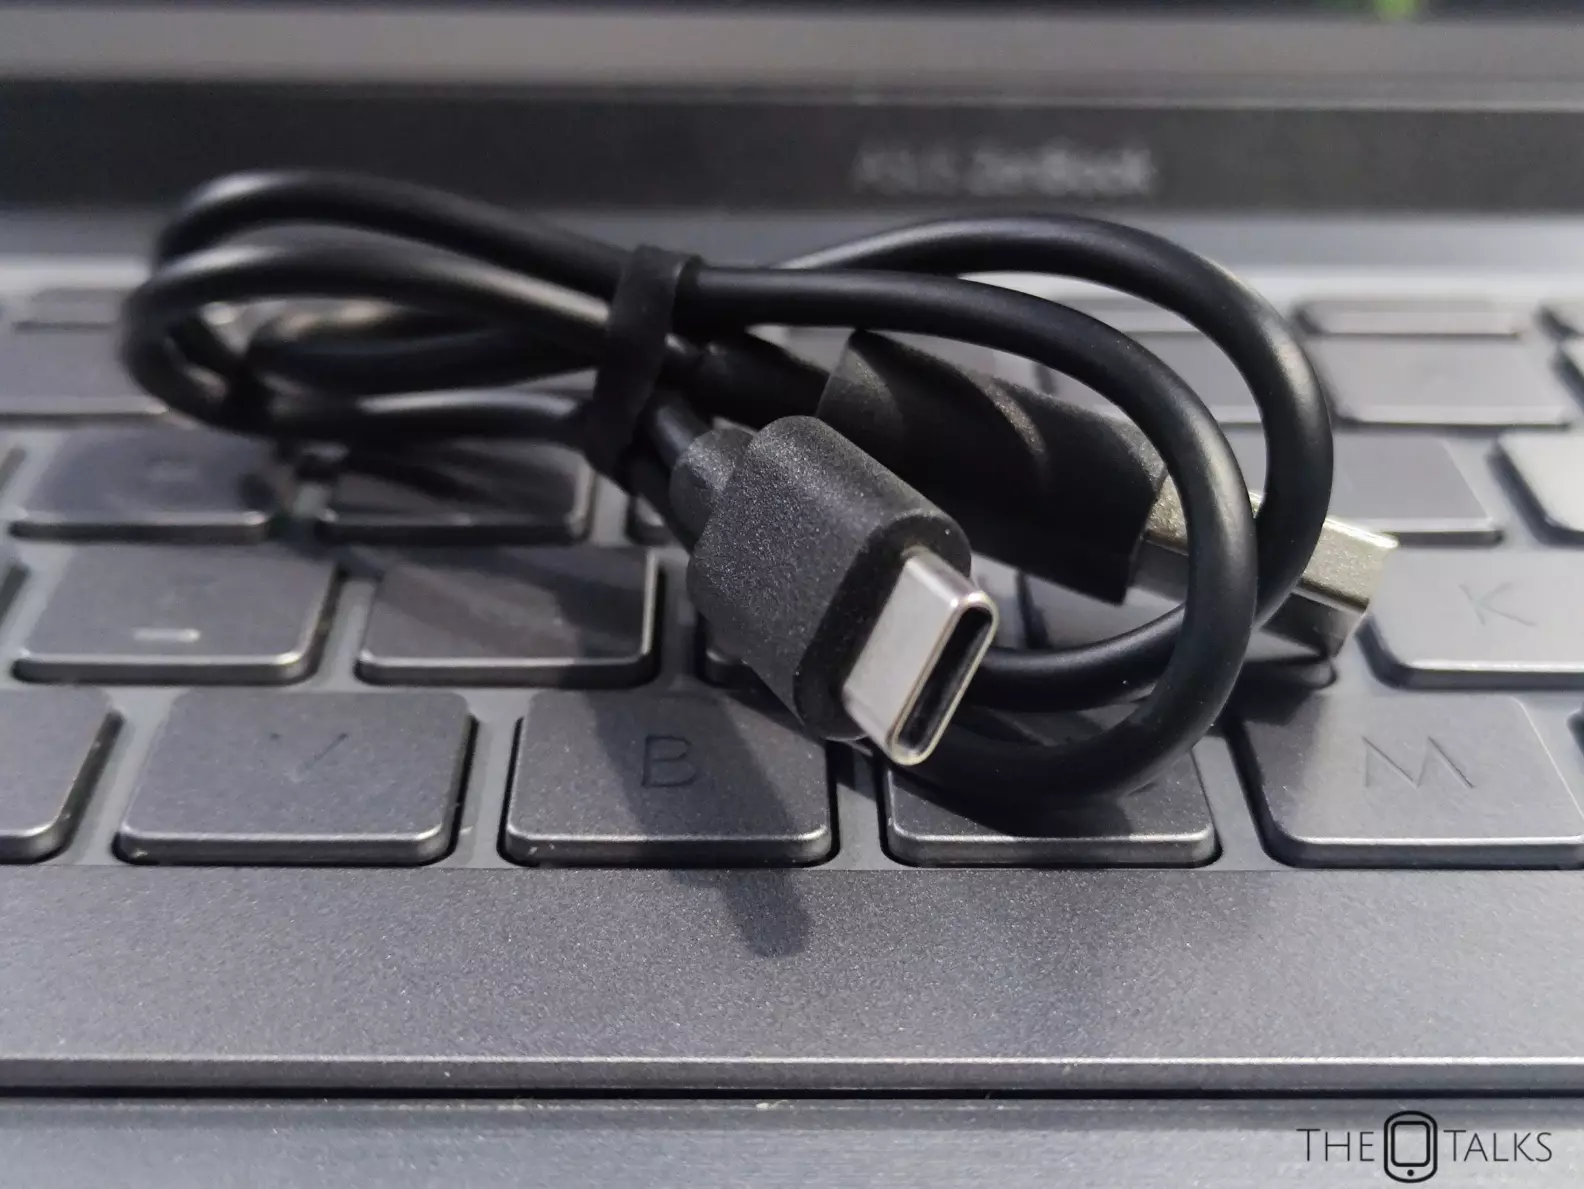 Edifier X2 earbuds review - charging cable